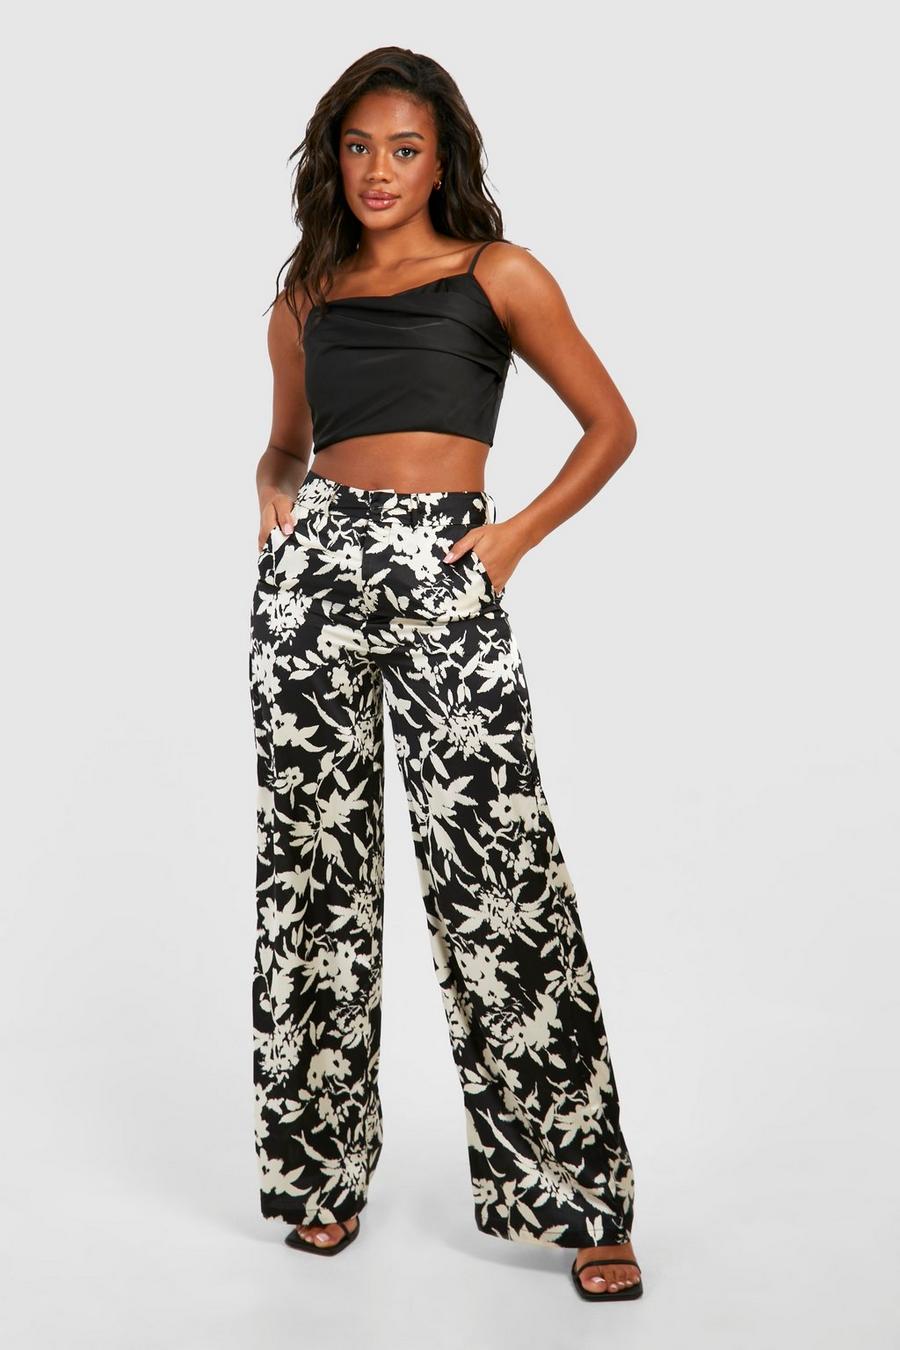 Floral Trousers, Floral Print Trousers